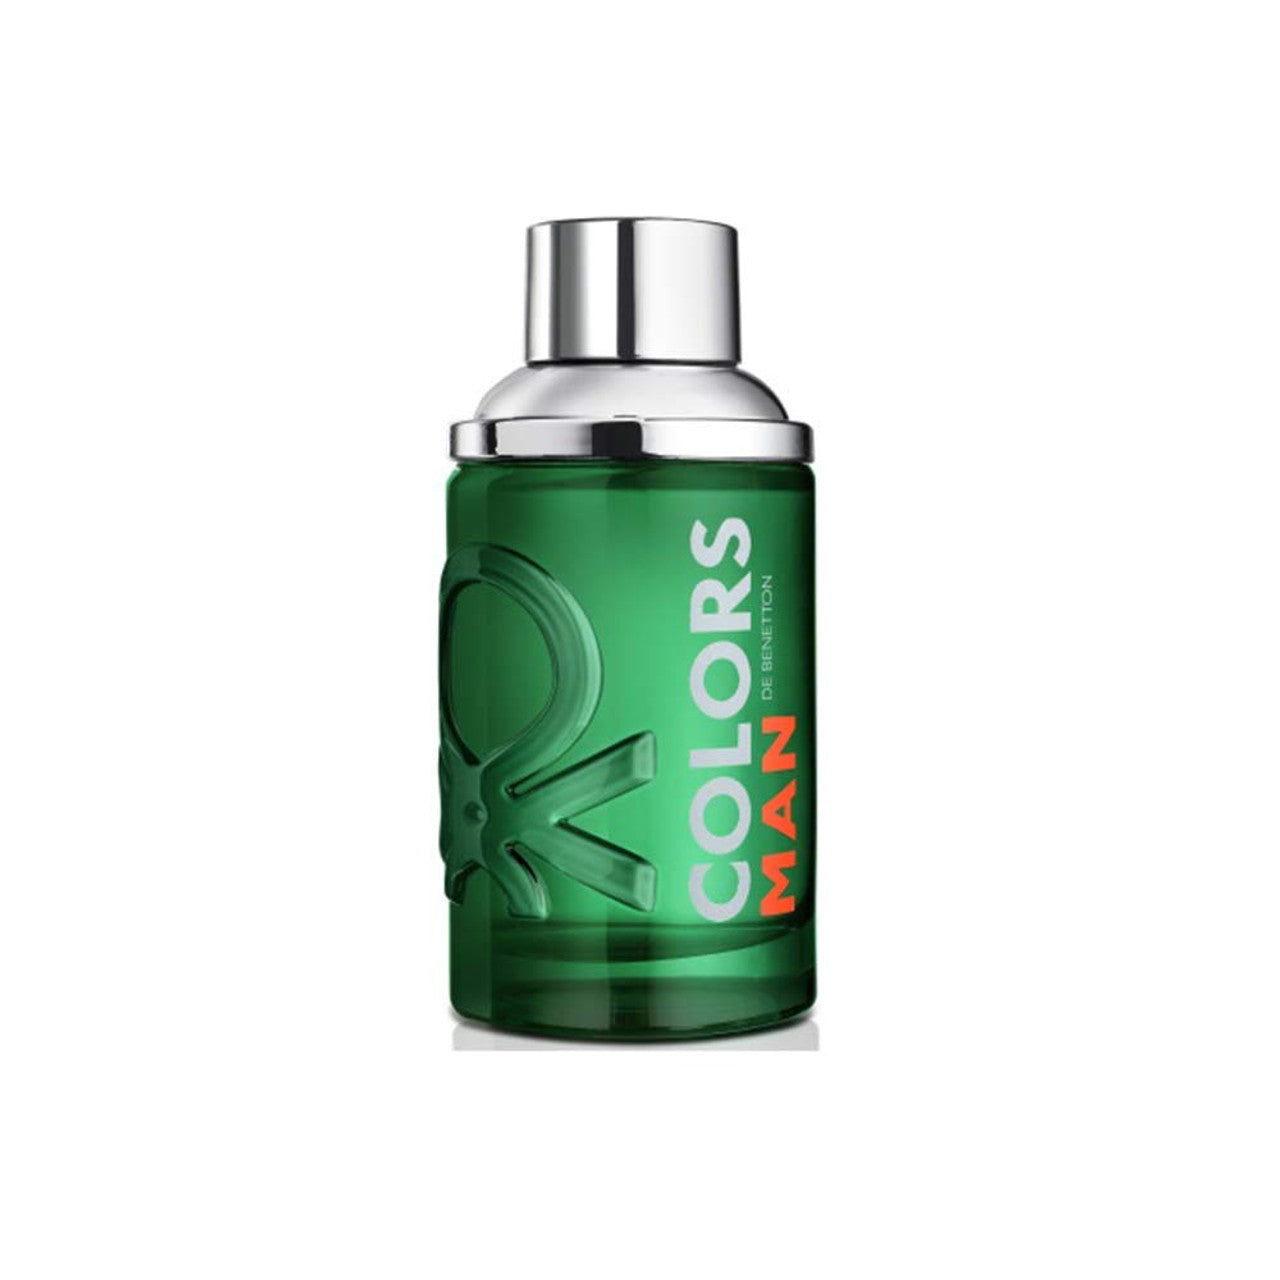 Colors Man Green By Benetton For Men 6.7 oz EDT Spray